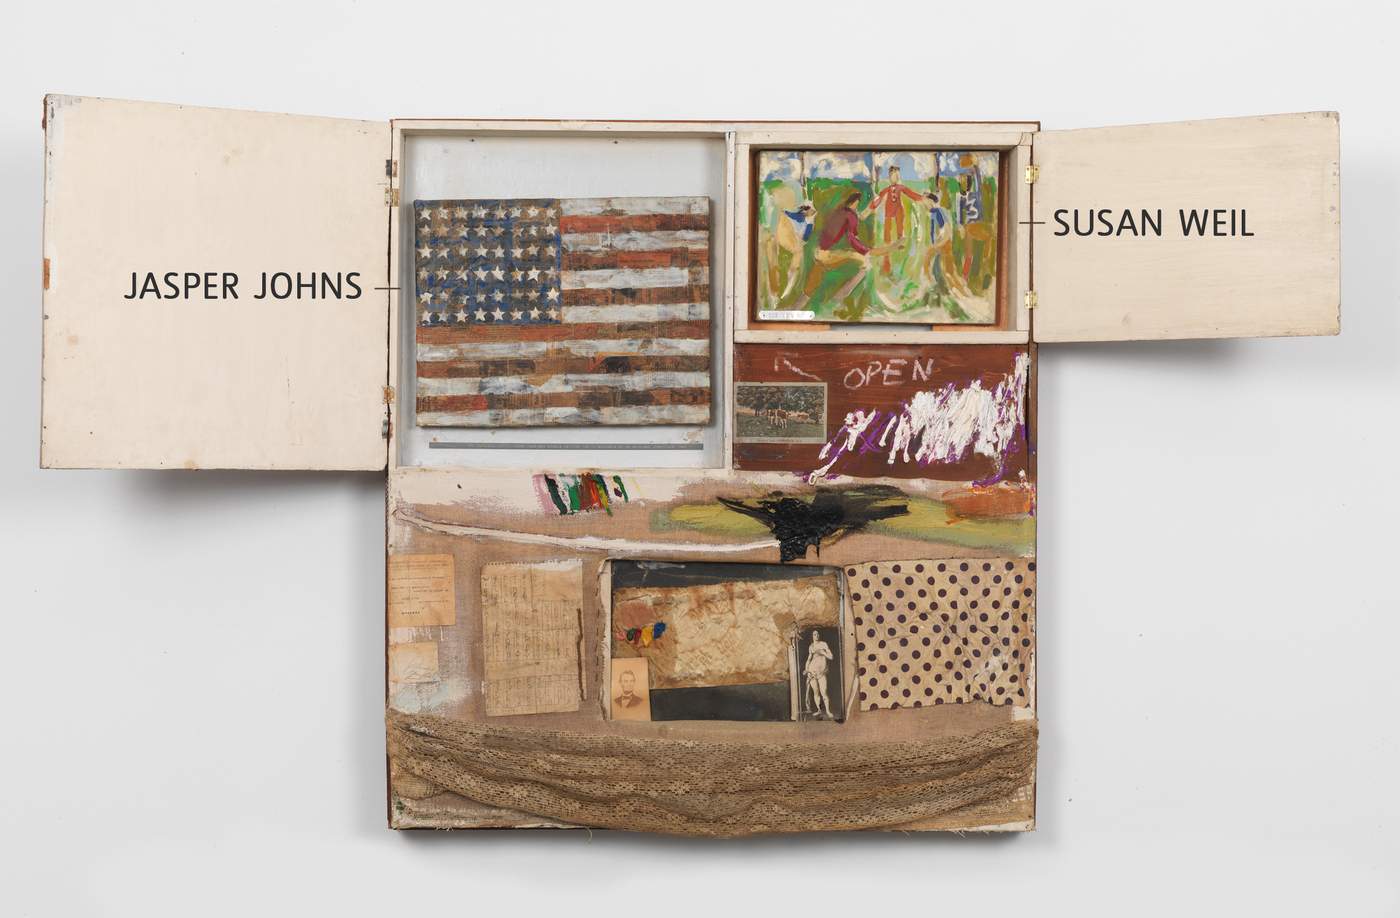 Short Circuit 1955. Combine containing painting by Susan Weil and Jasper Johns Flag painting (reproduction by Elaine Sturtevant) © Robert Rauschenberg Foundation